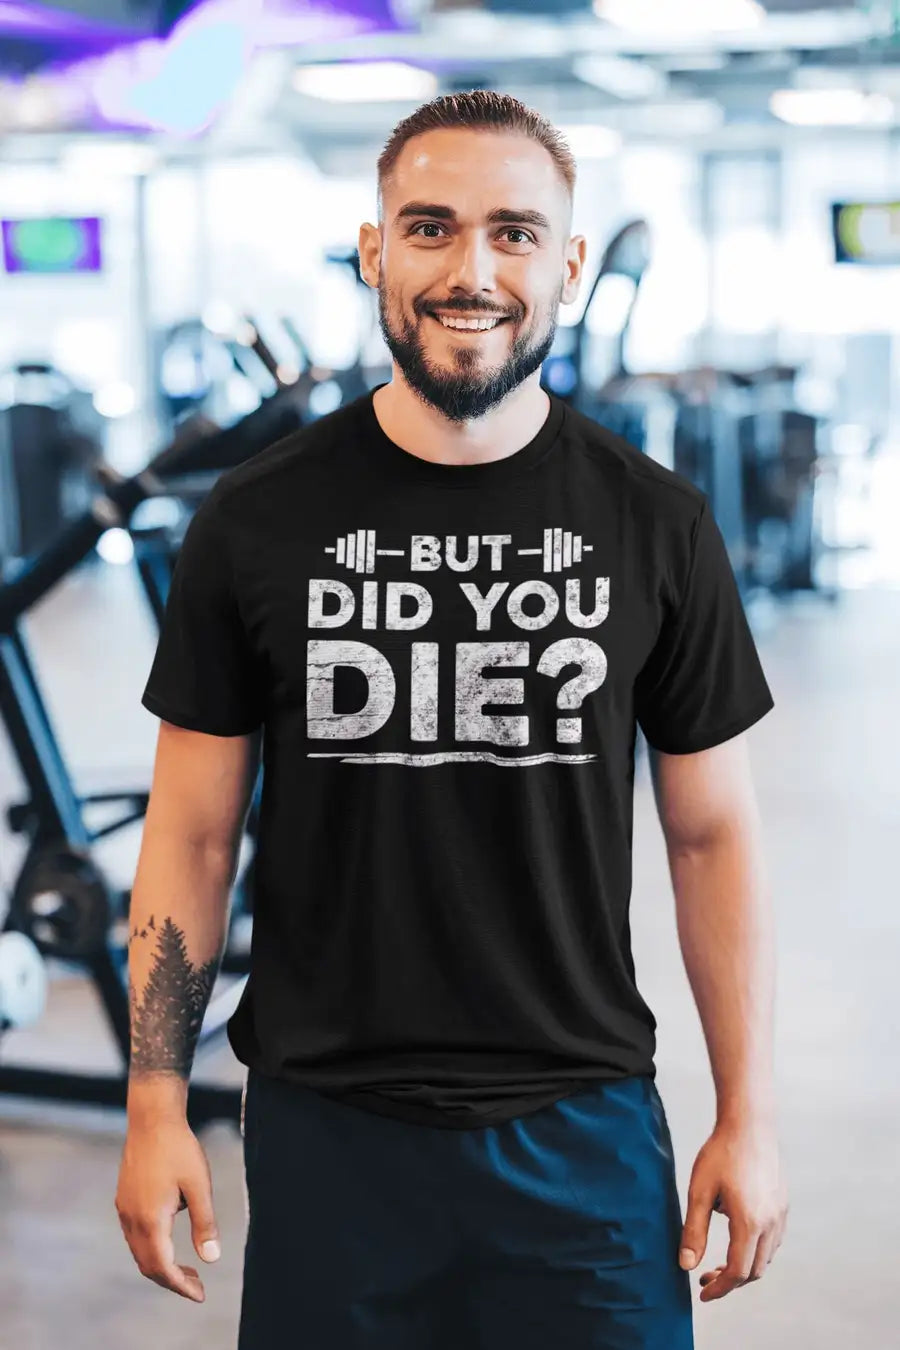 Did you Die - Workout Motivation T Shirt for Men and Women | Premium Design | Catch My Drift India - Catch My Drift India Clothing clothing, general, gym, made in india, shirt, t shirt, trend